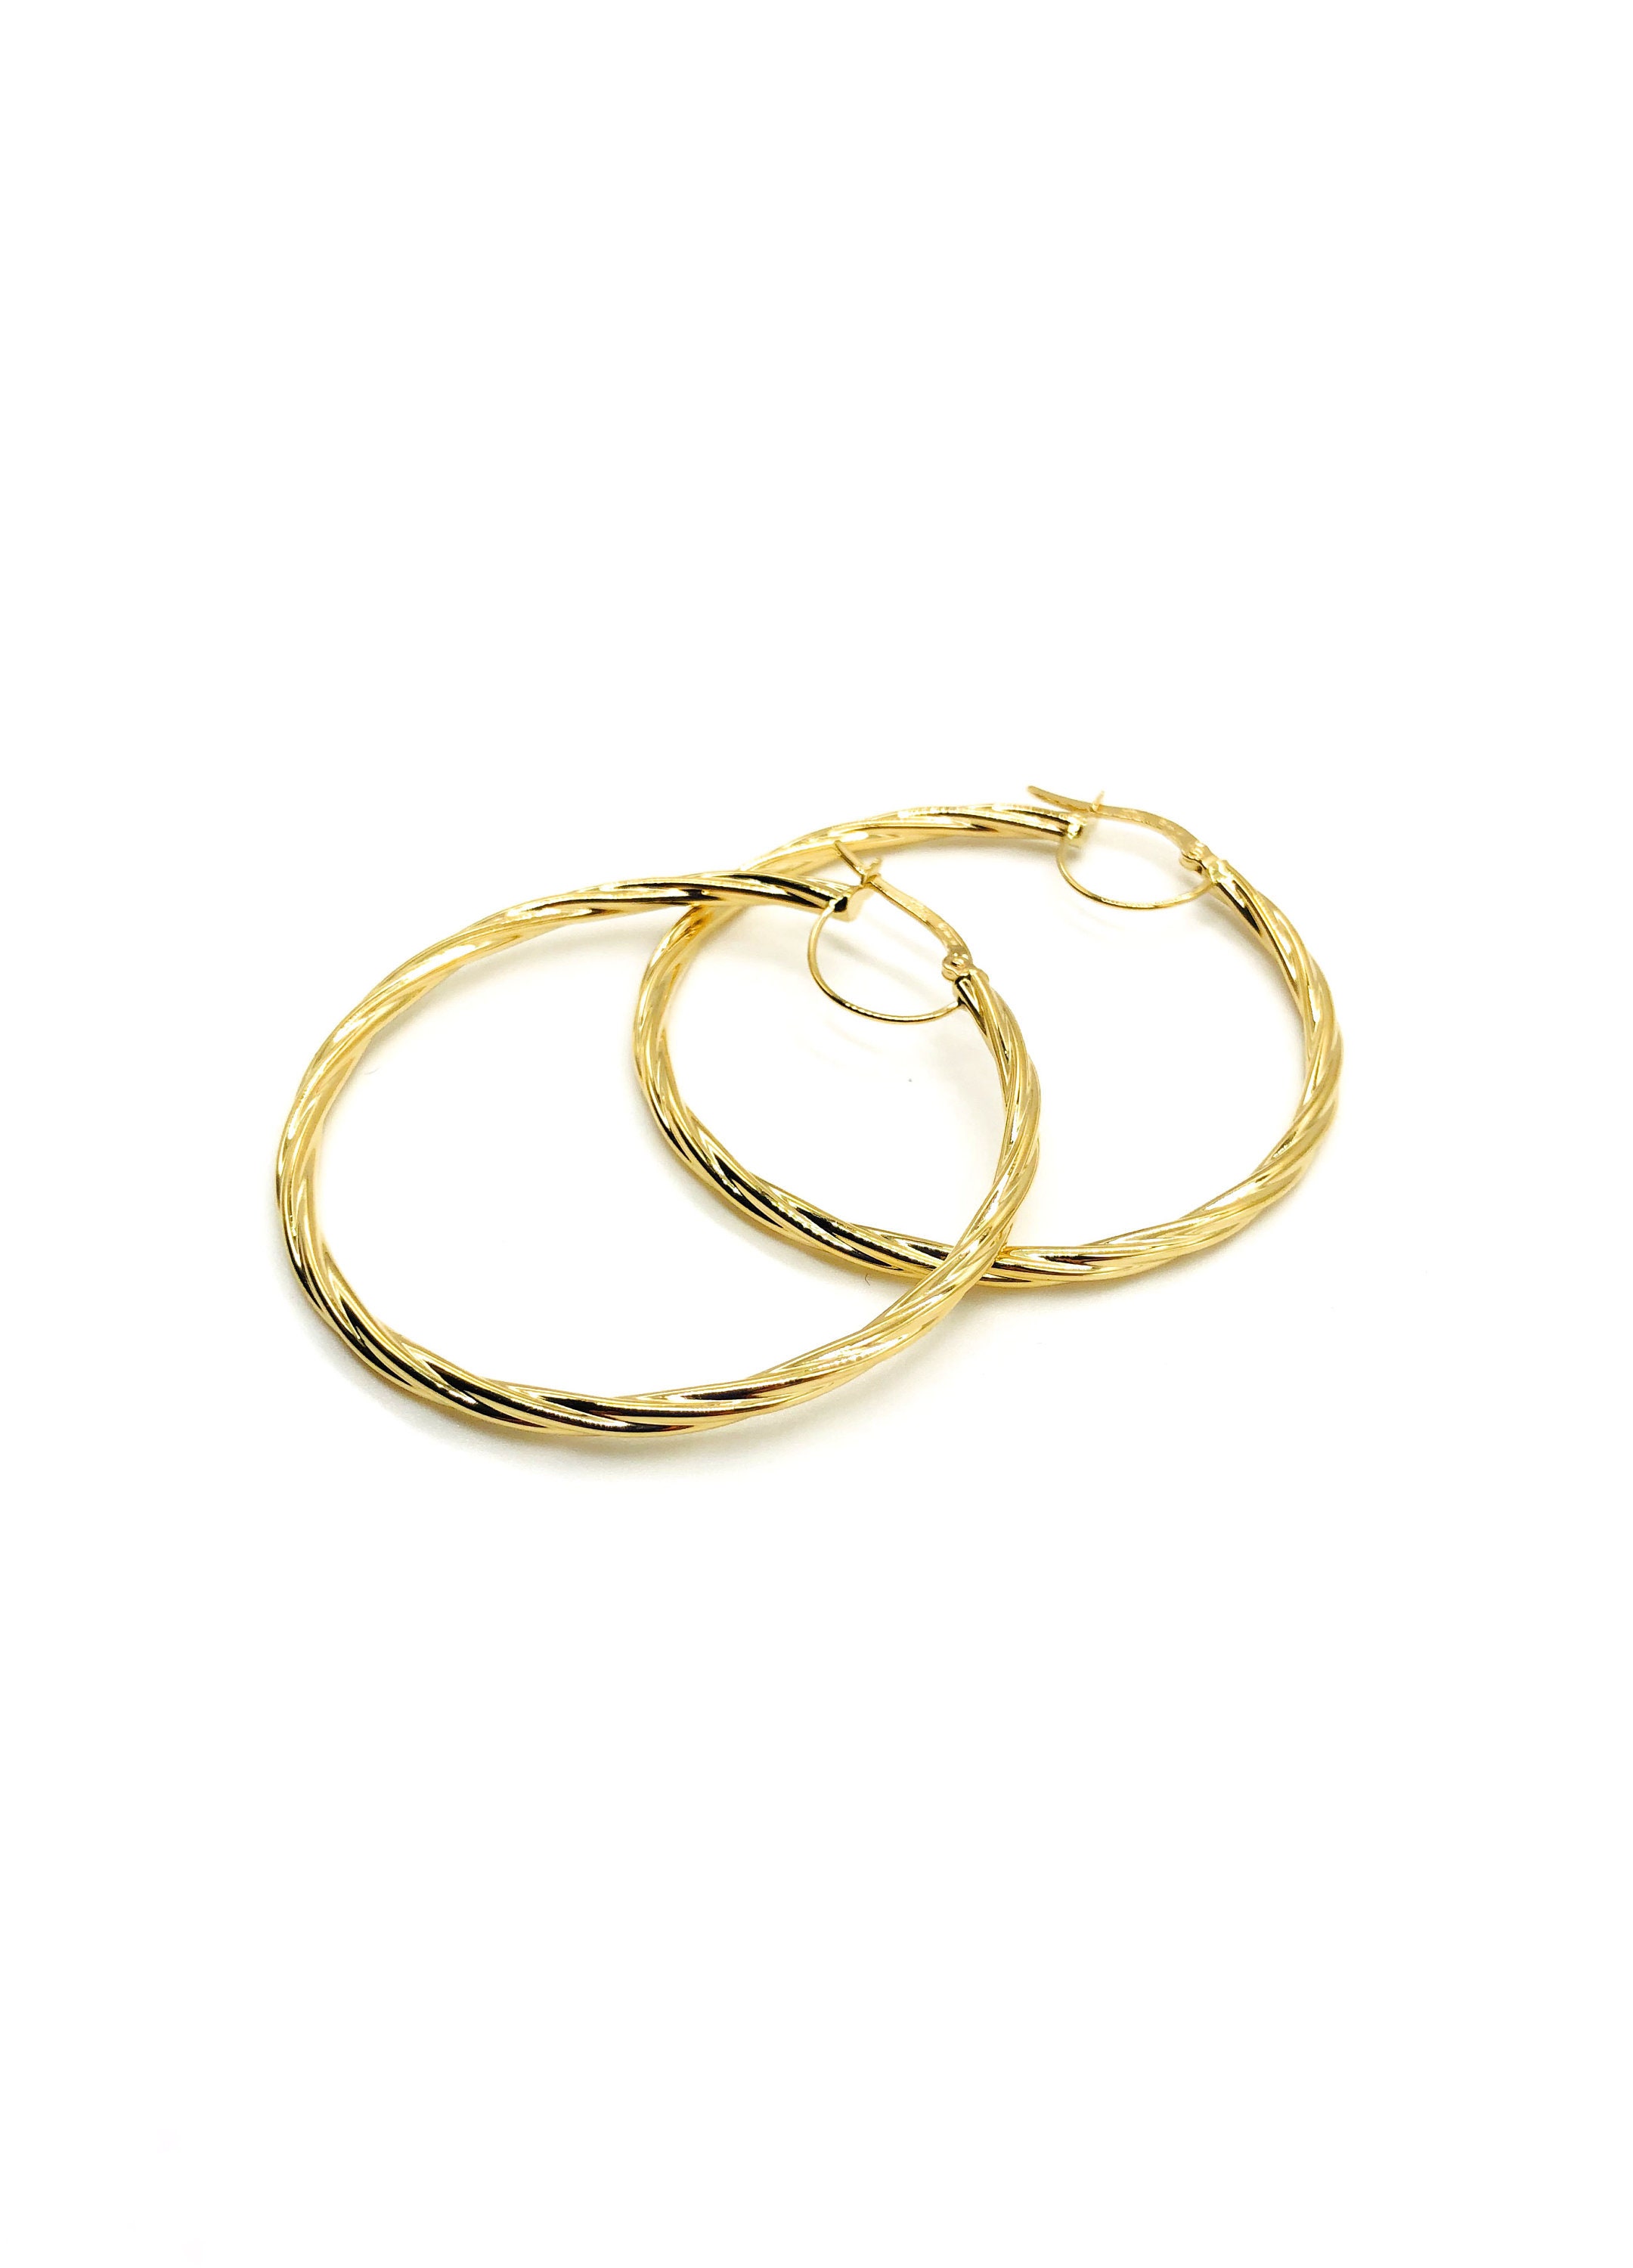 18K Gold Twisted Hoop Earrings Rope Hoops Italian Gift For Her Made in Italy